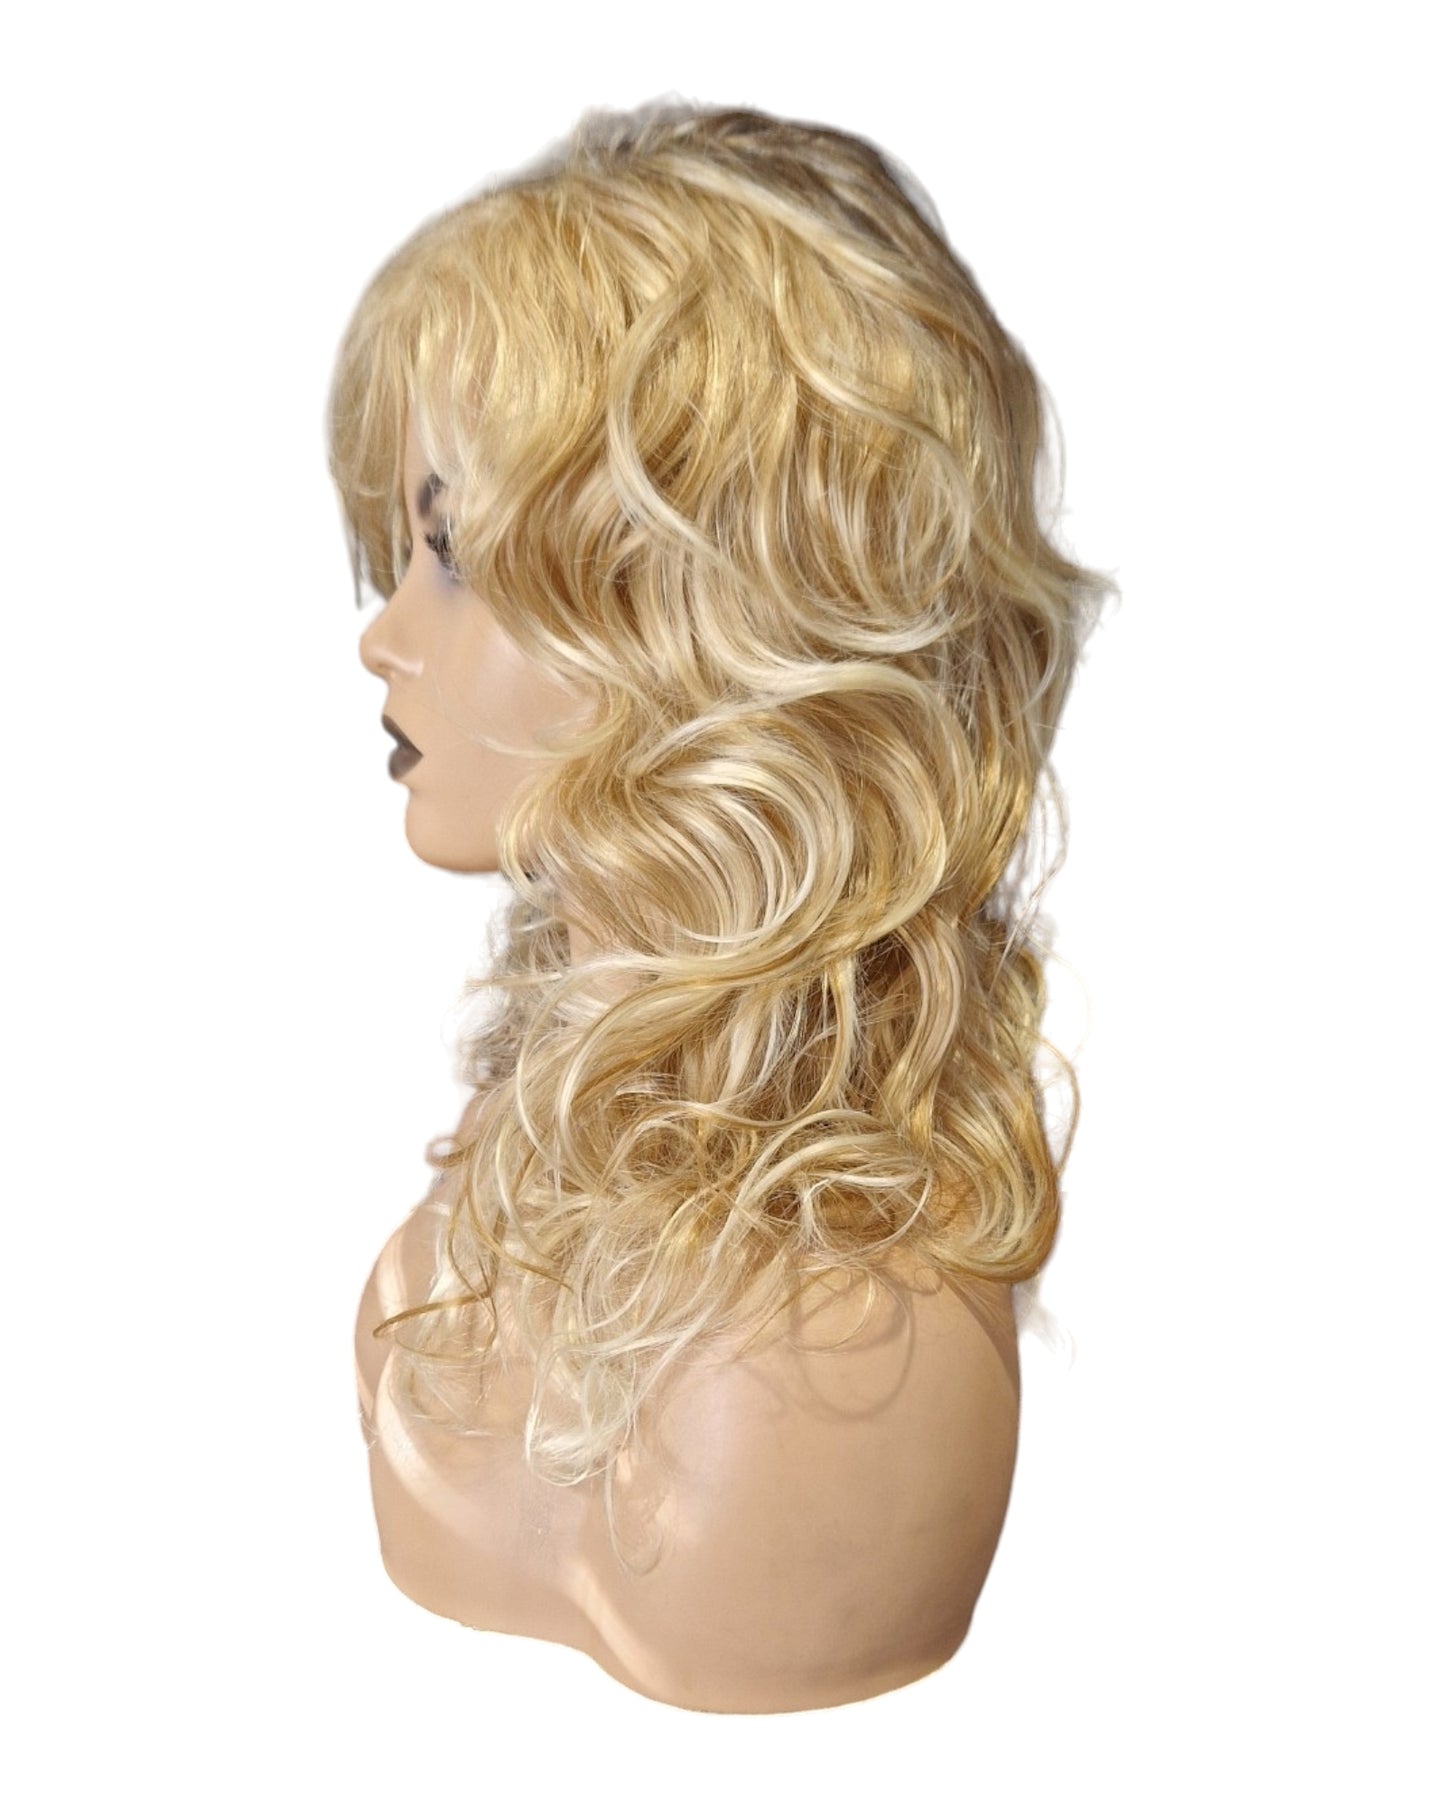 Blonde Dolly Curly Style Wig. Wren